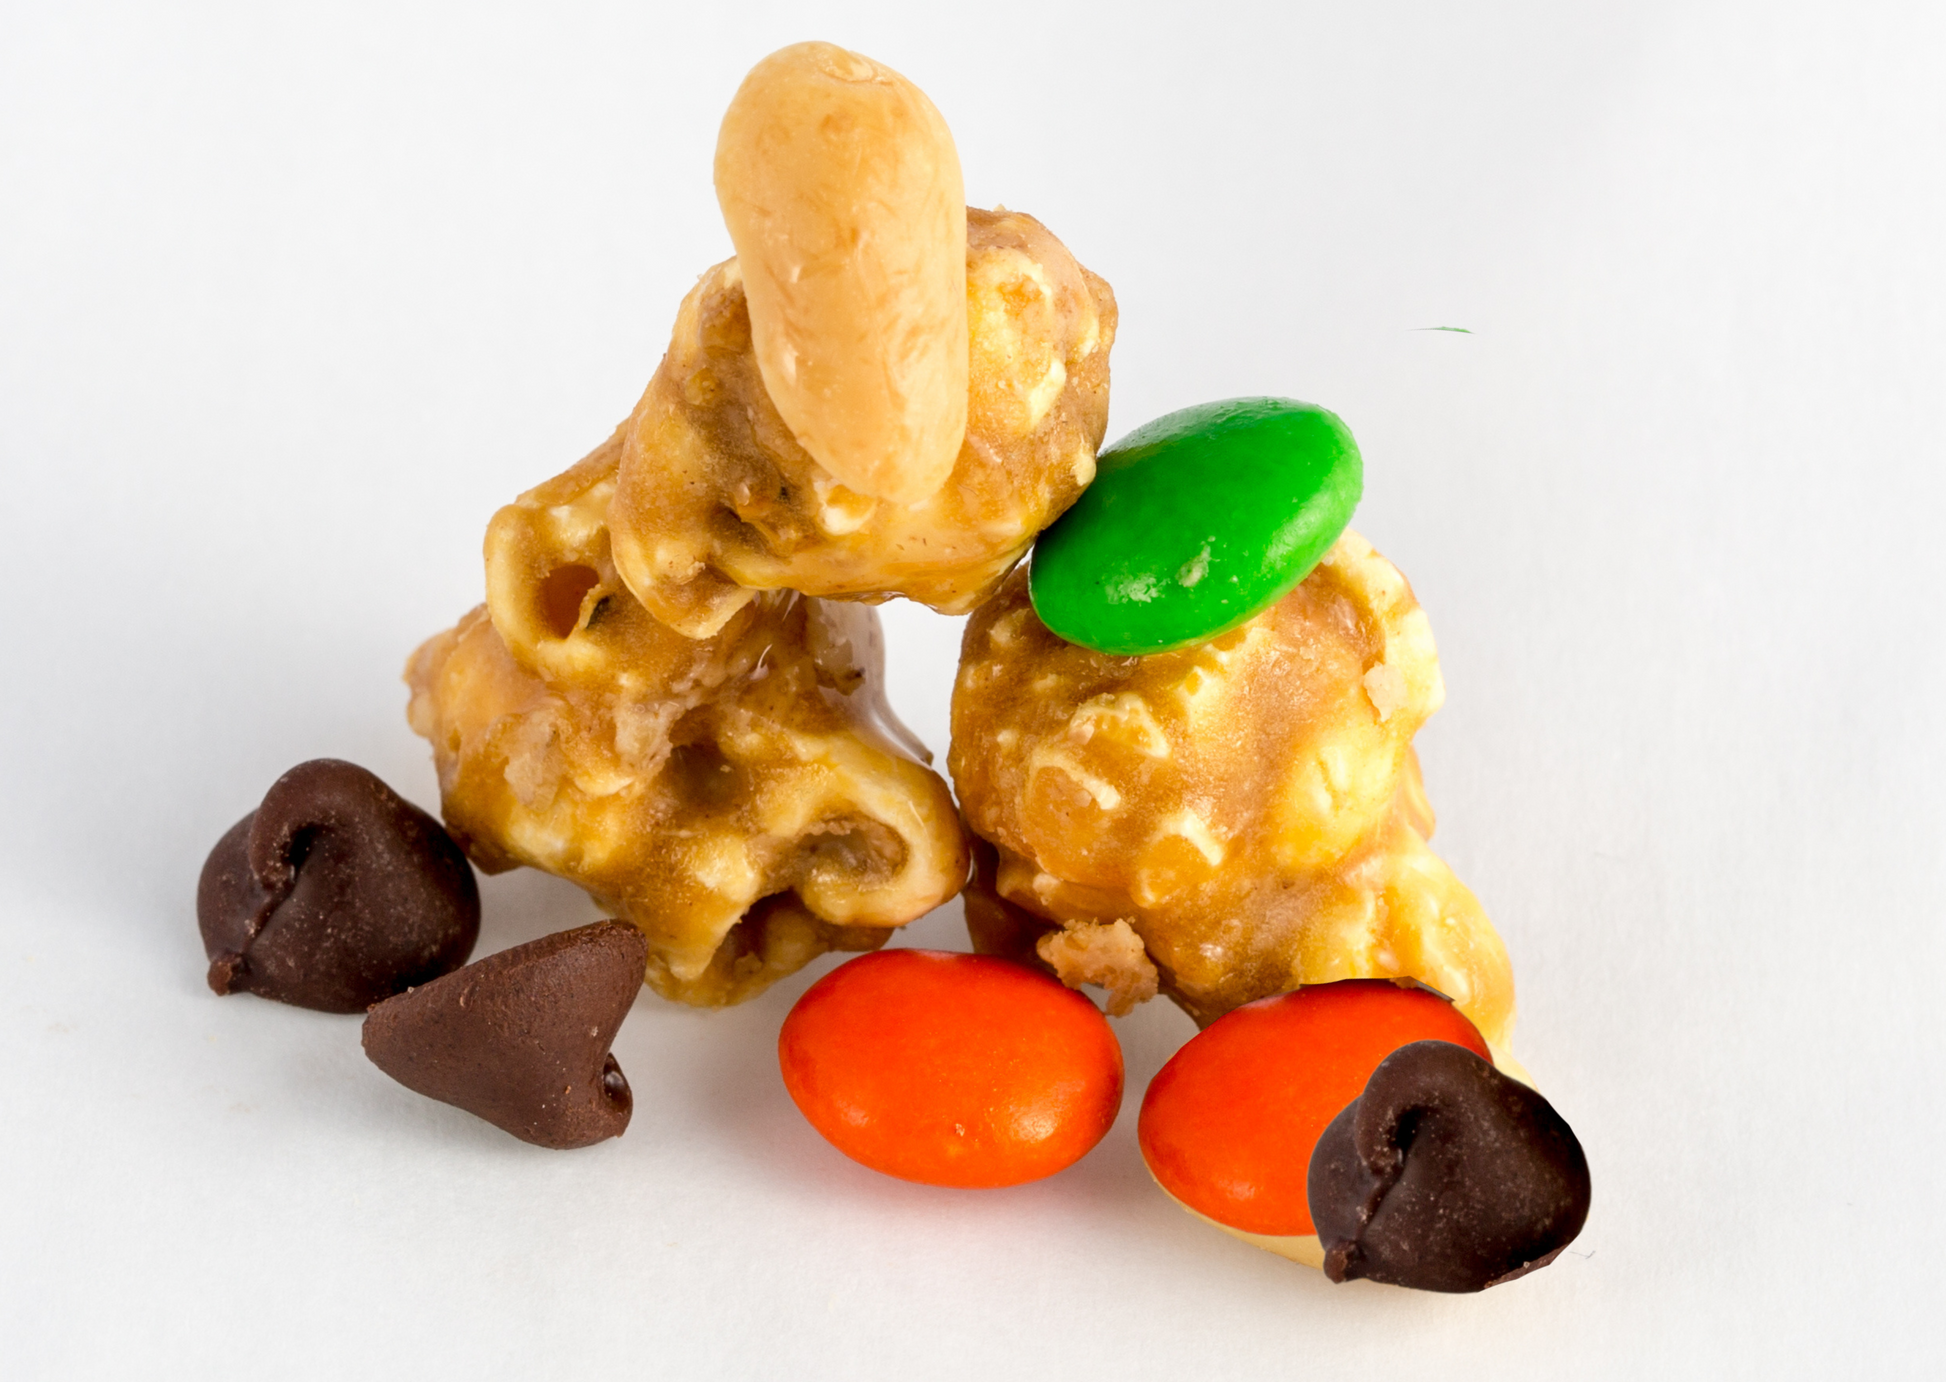 Three pieces of peanut butter-covered popcorn with M&Ms and chocolate chips.